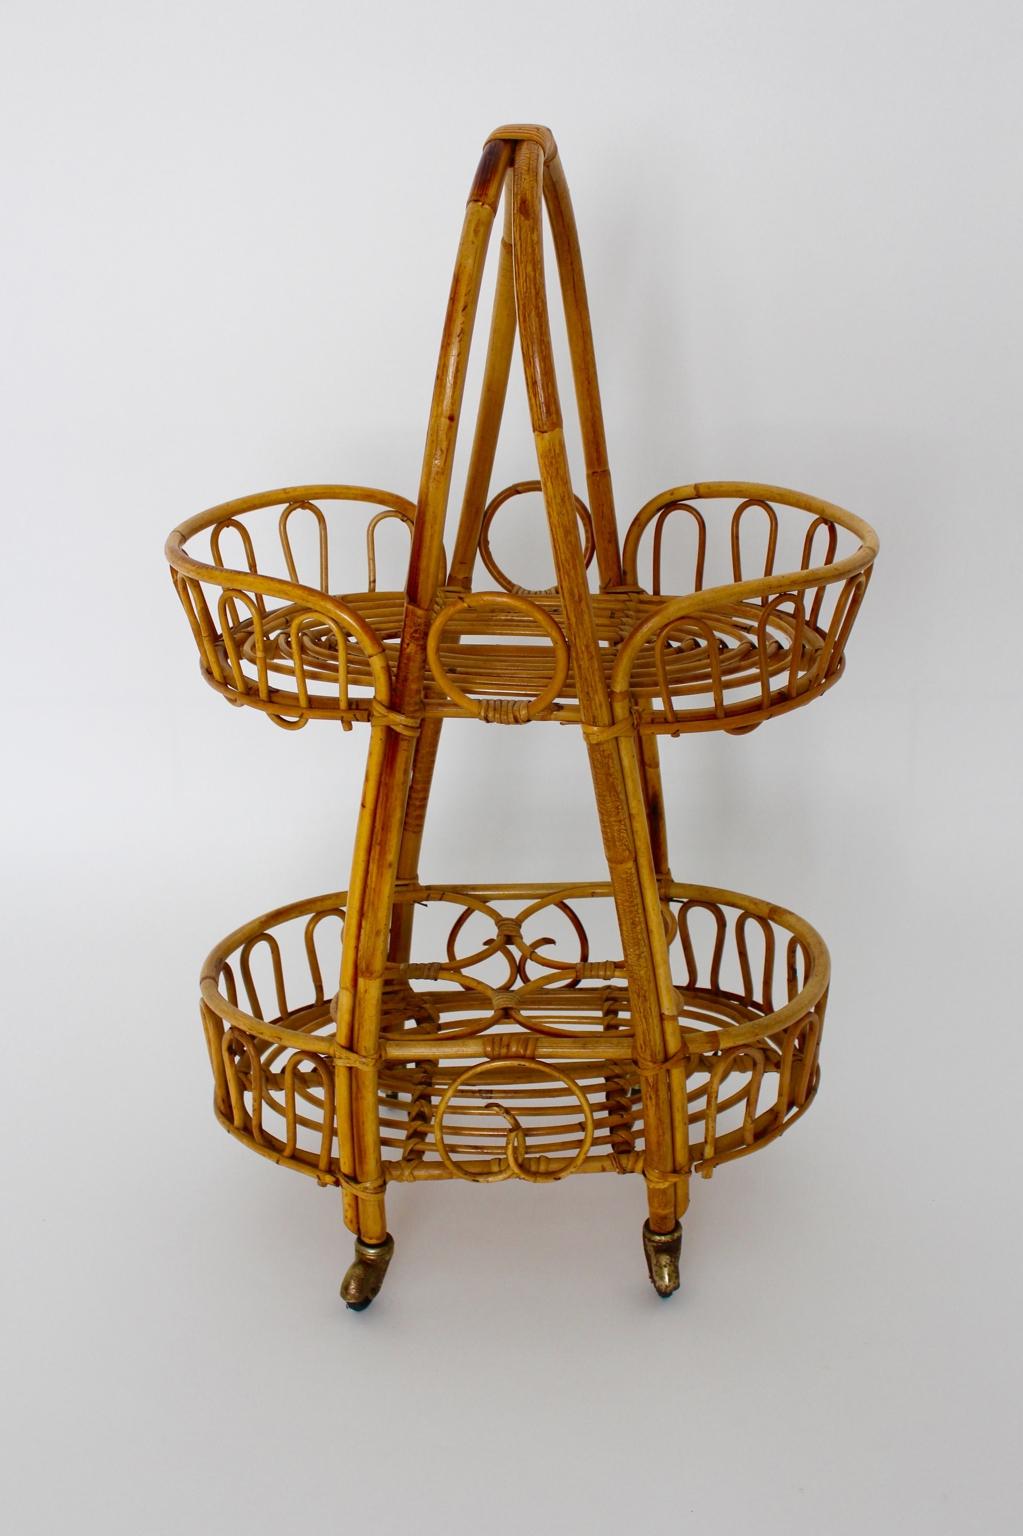 Mid Century Modern Vintage bar cart wheel supported from rattan 1950s Italy.
This presented cute rattan vintage bar cart from the 1950s was designed and made in Italy.
Furthermore the bar cart is usable not only for bottles and beverages also to